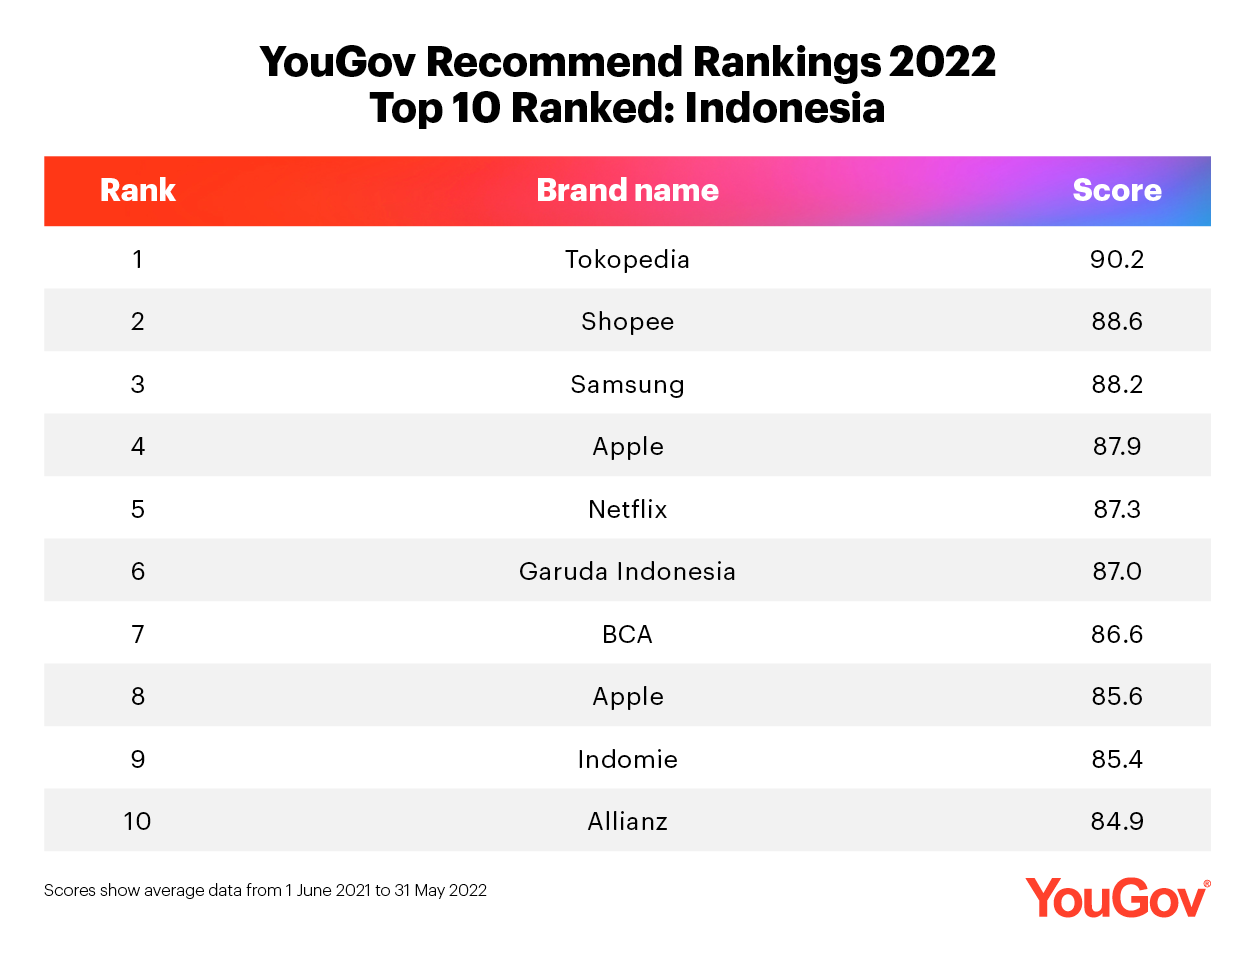 platforms Tokopedia and Shopee lead YouGov’s